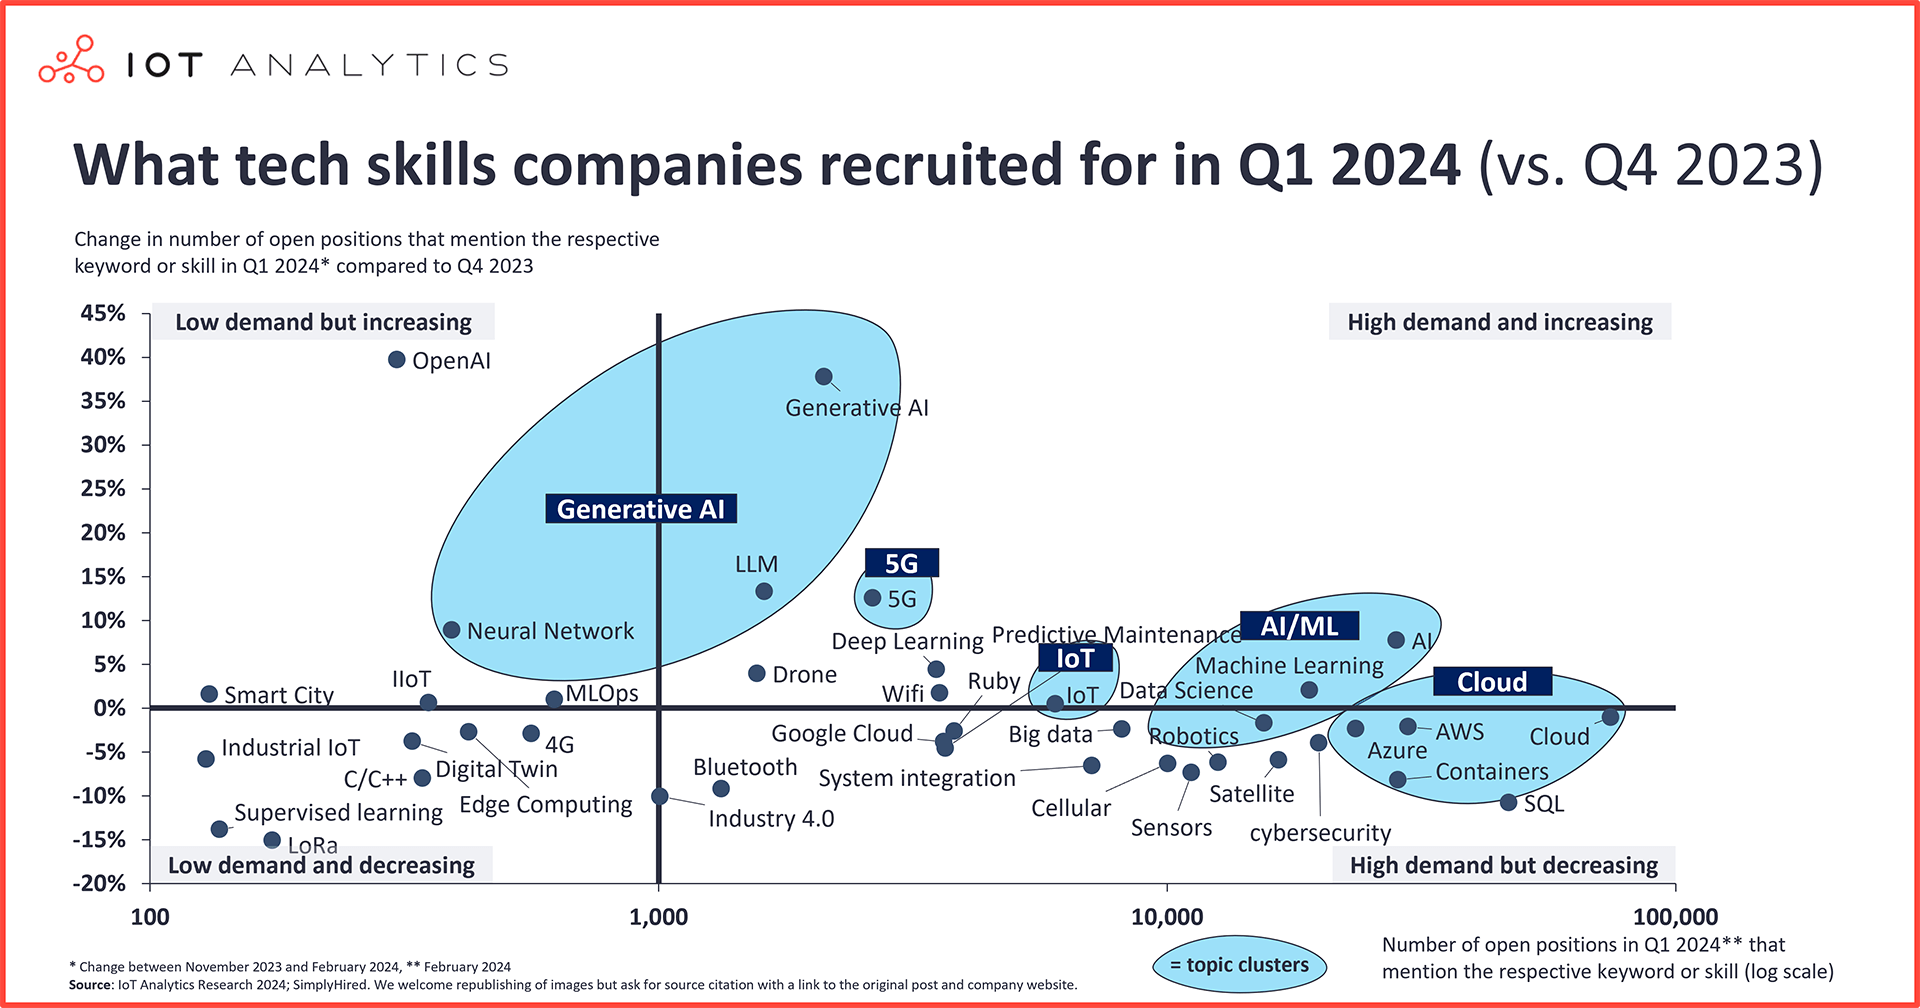 What tech skills companies recruited for in Q1 2024 vs Q4 2023